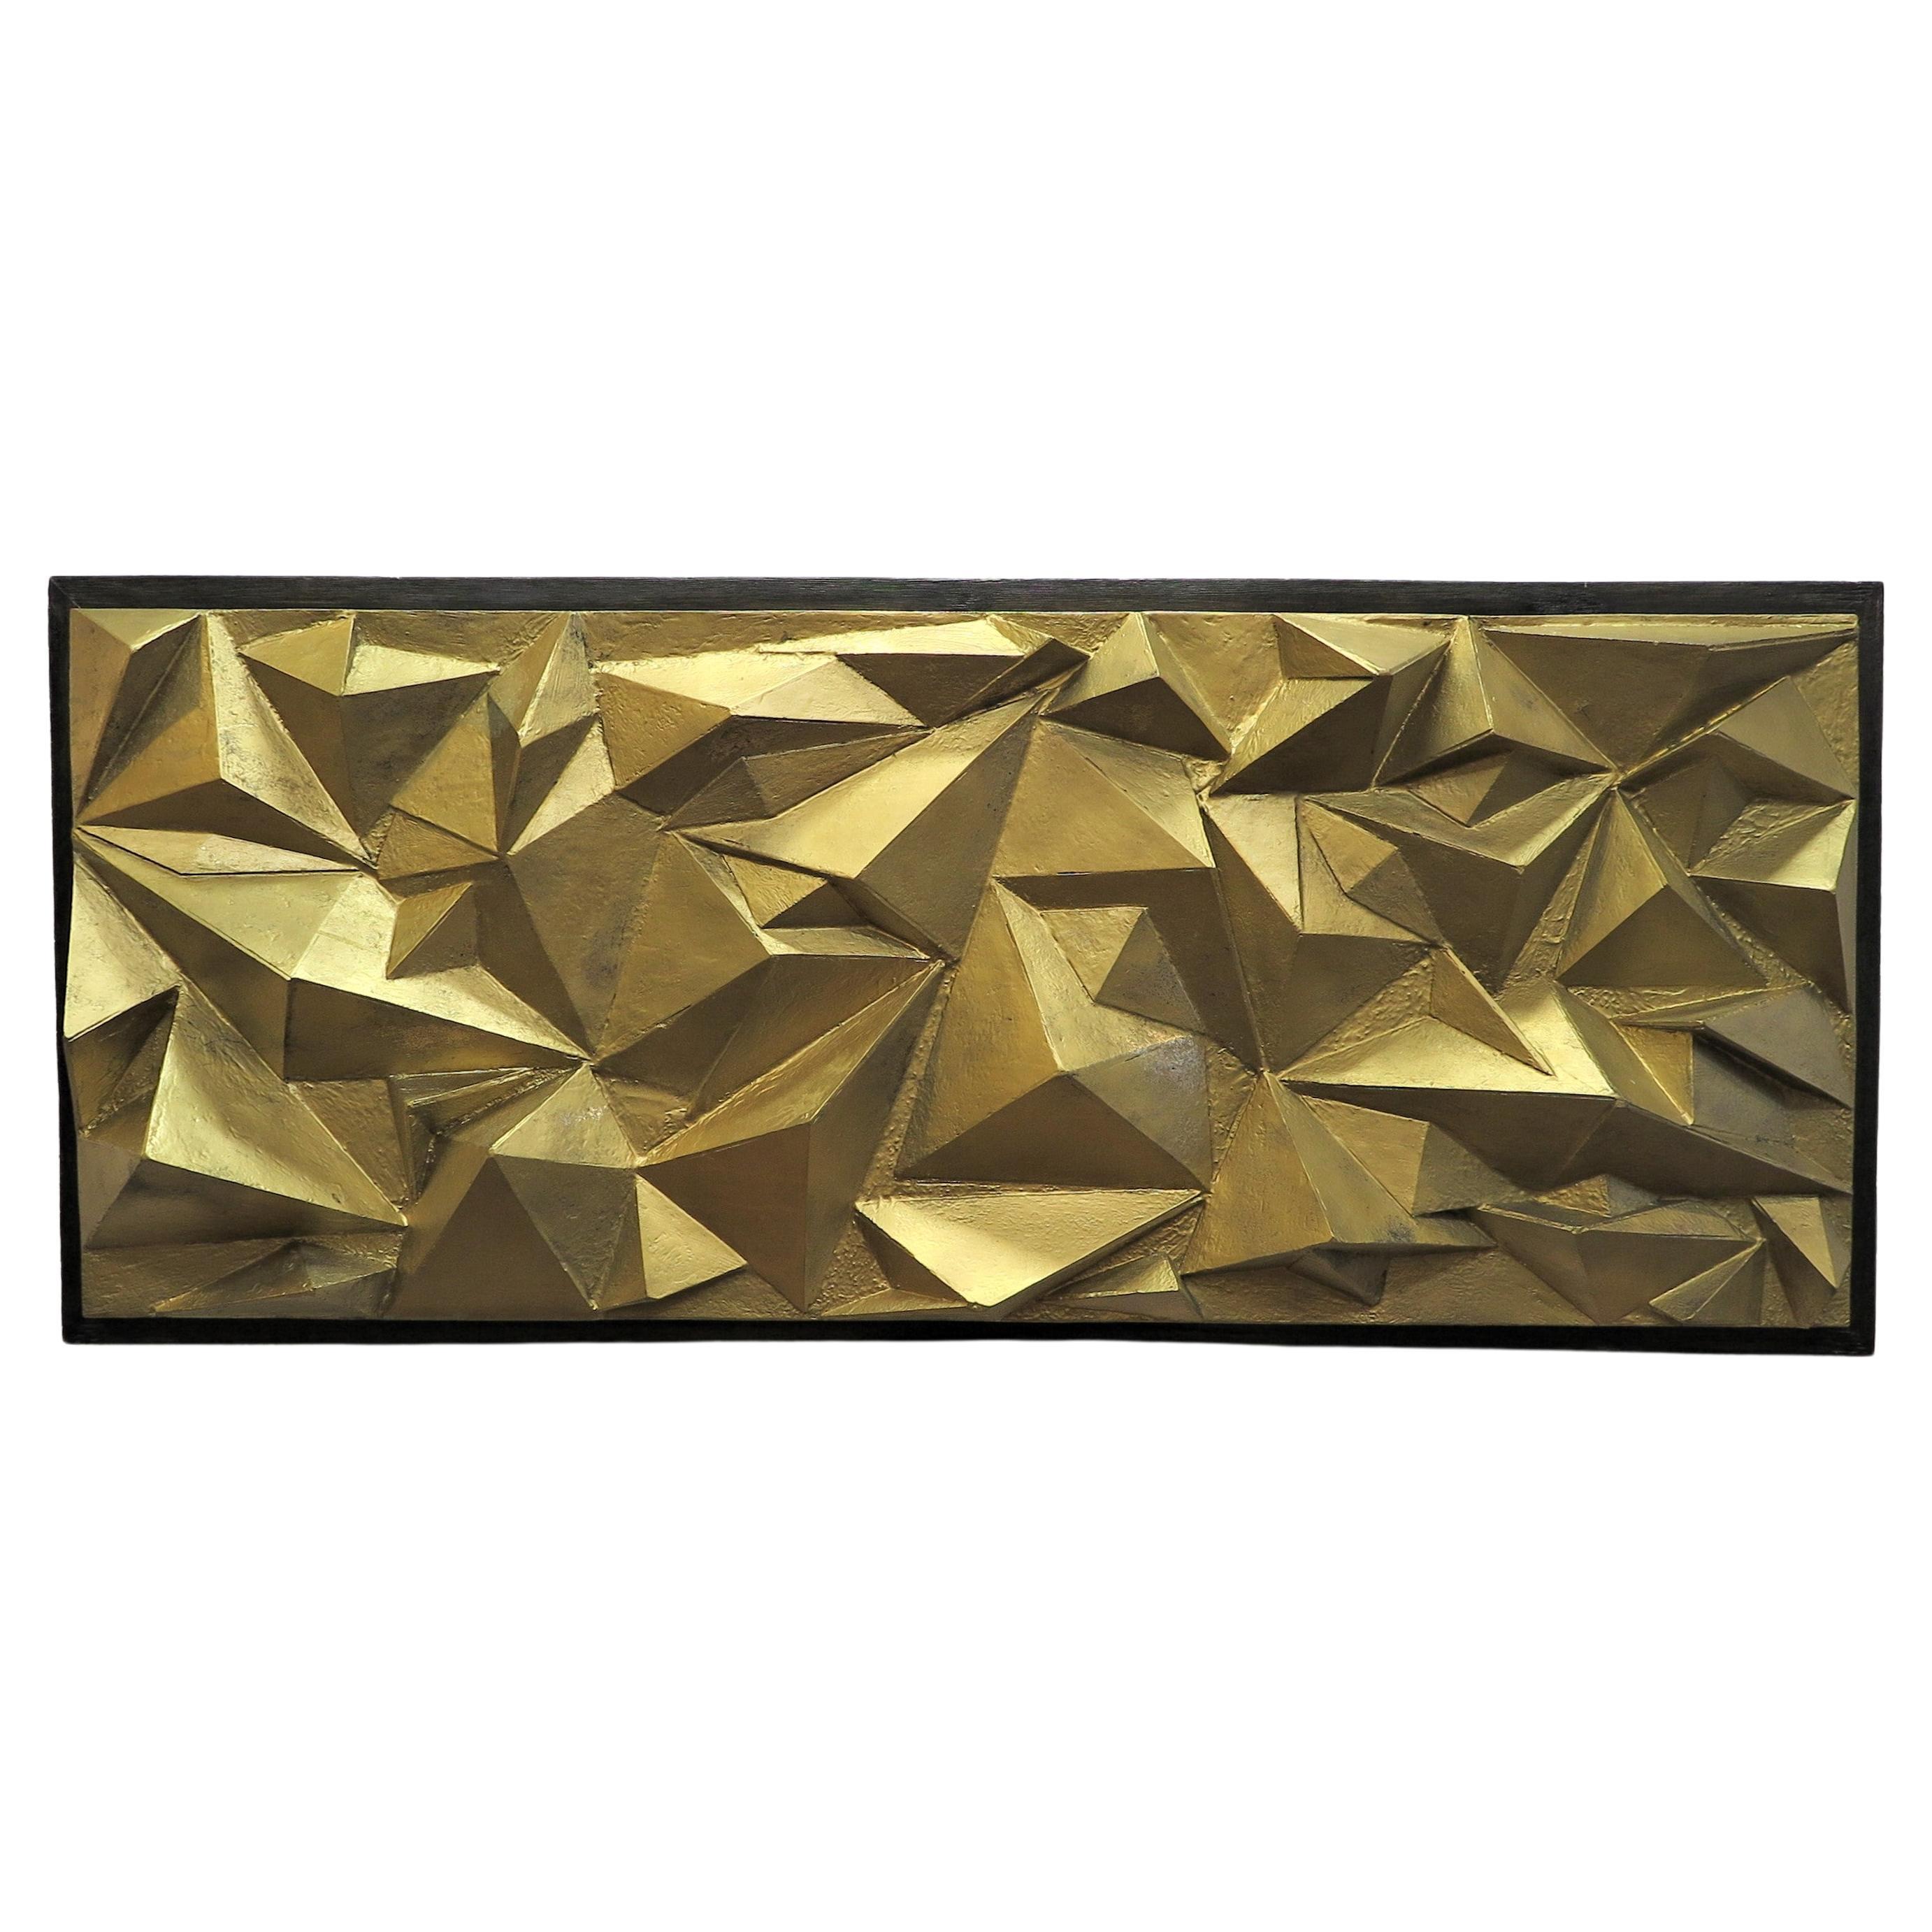 A midcentury Brutalist wall sculpture of the period. Brutalist Abstract Wall Art Sculpture made of fiberglass. Large scale Brutalist Sculpture of abstract protruding geometric polygon shapes and triangular 3D pyramid shapes presented as scalene